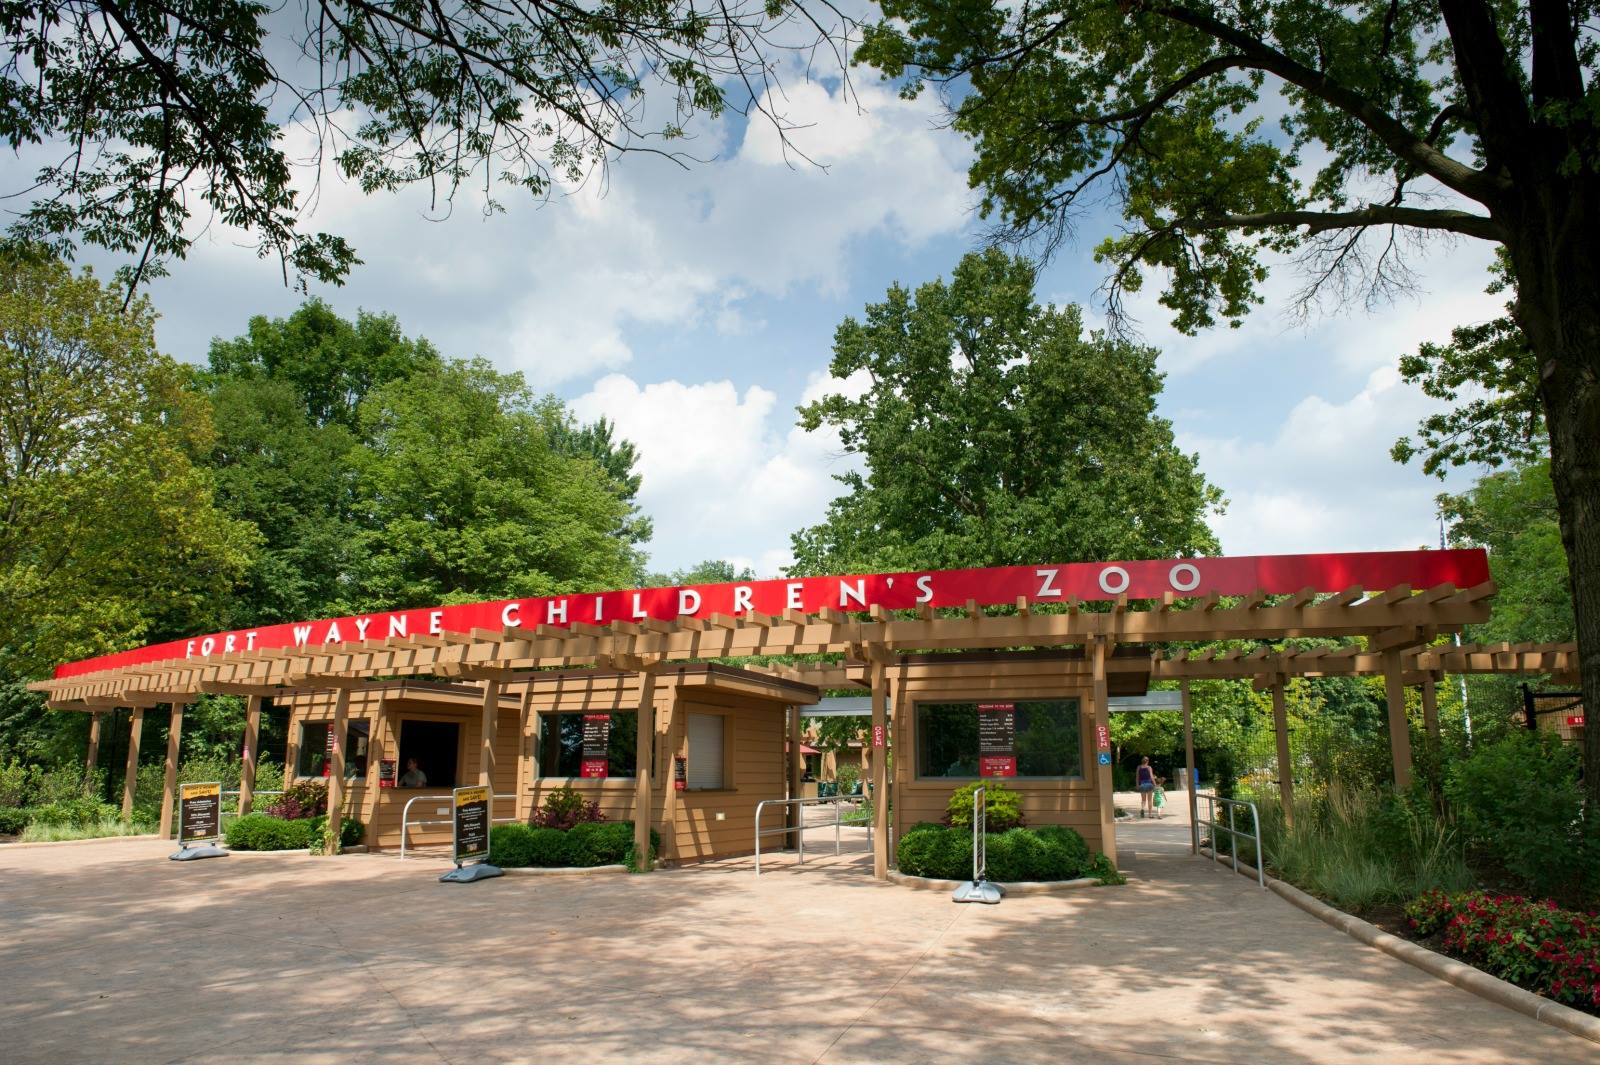 Fort Wayne Children's Zoo In Indiana Is The City Zoo